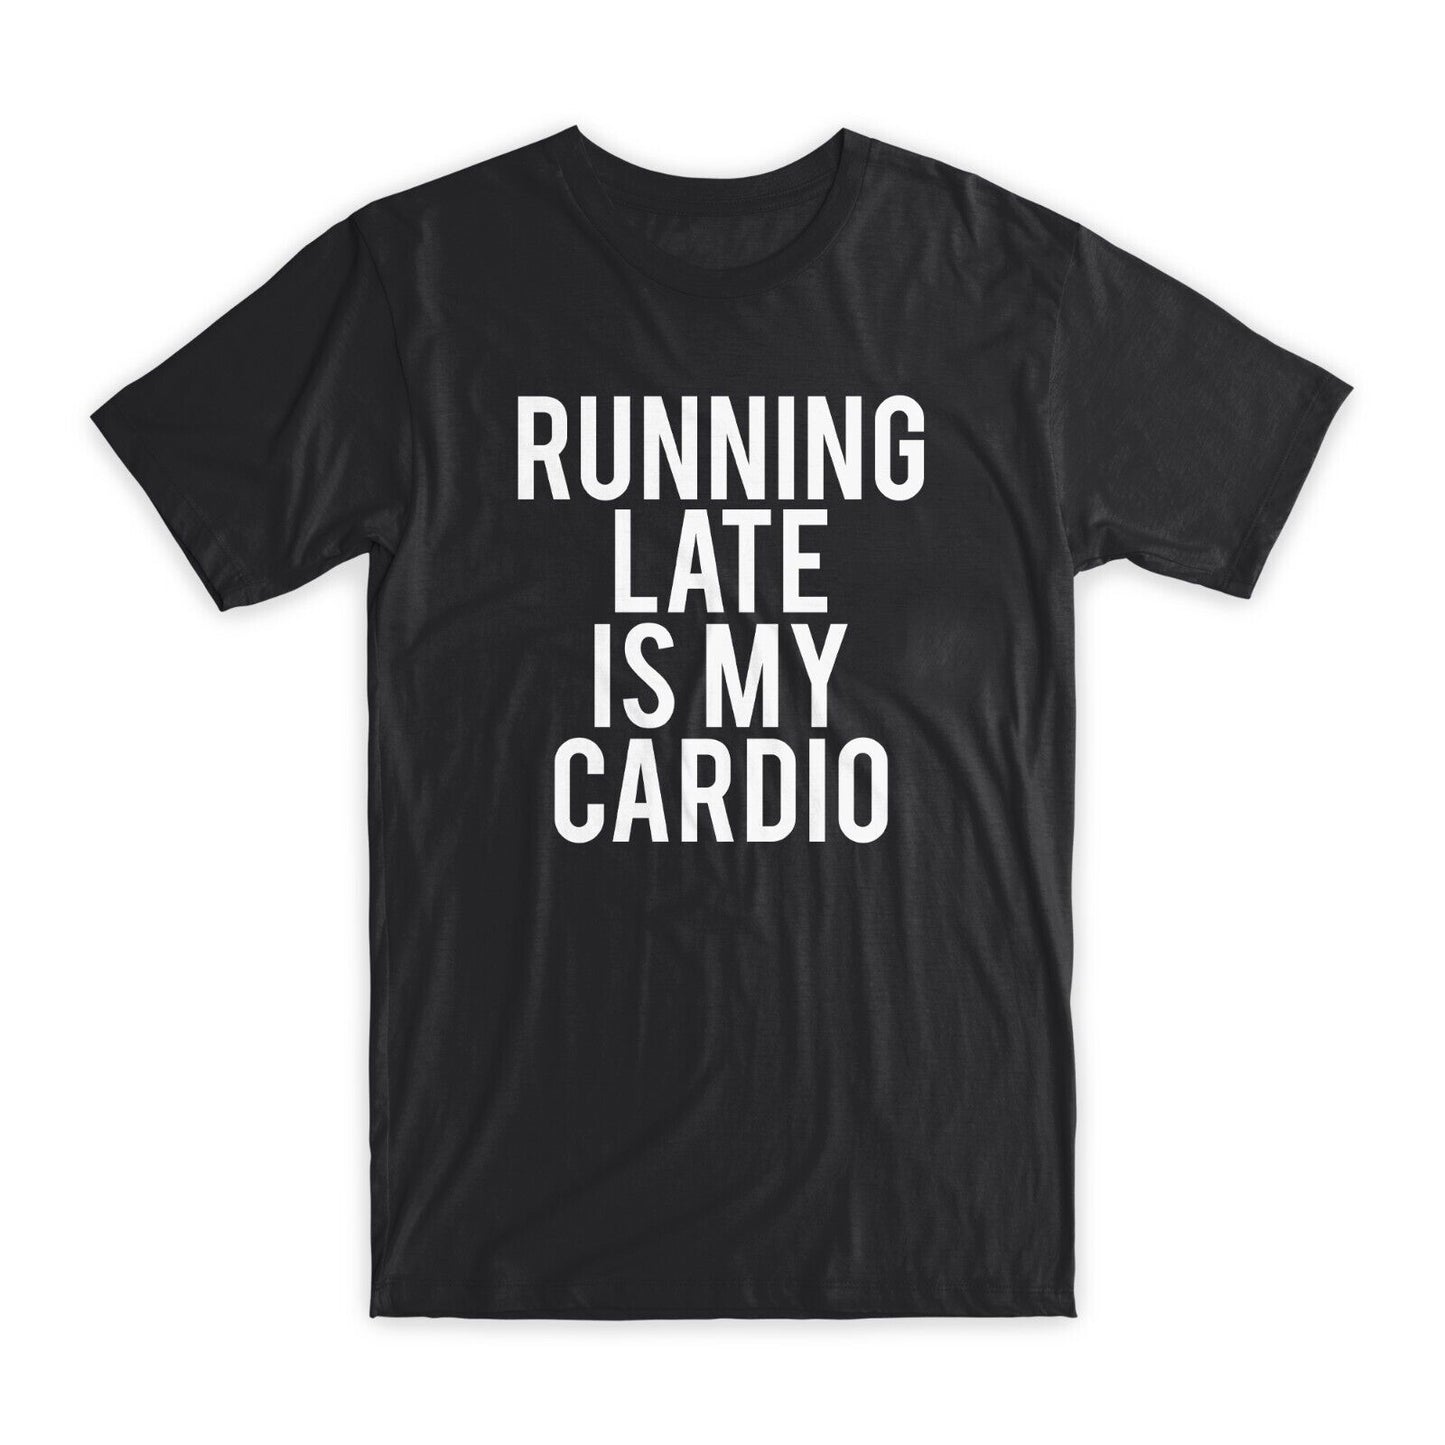 Running Late is My Cardio T-Shirt Premium Cotton Crew Neck Funny Tees Gifts NEW